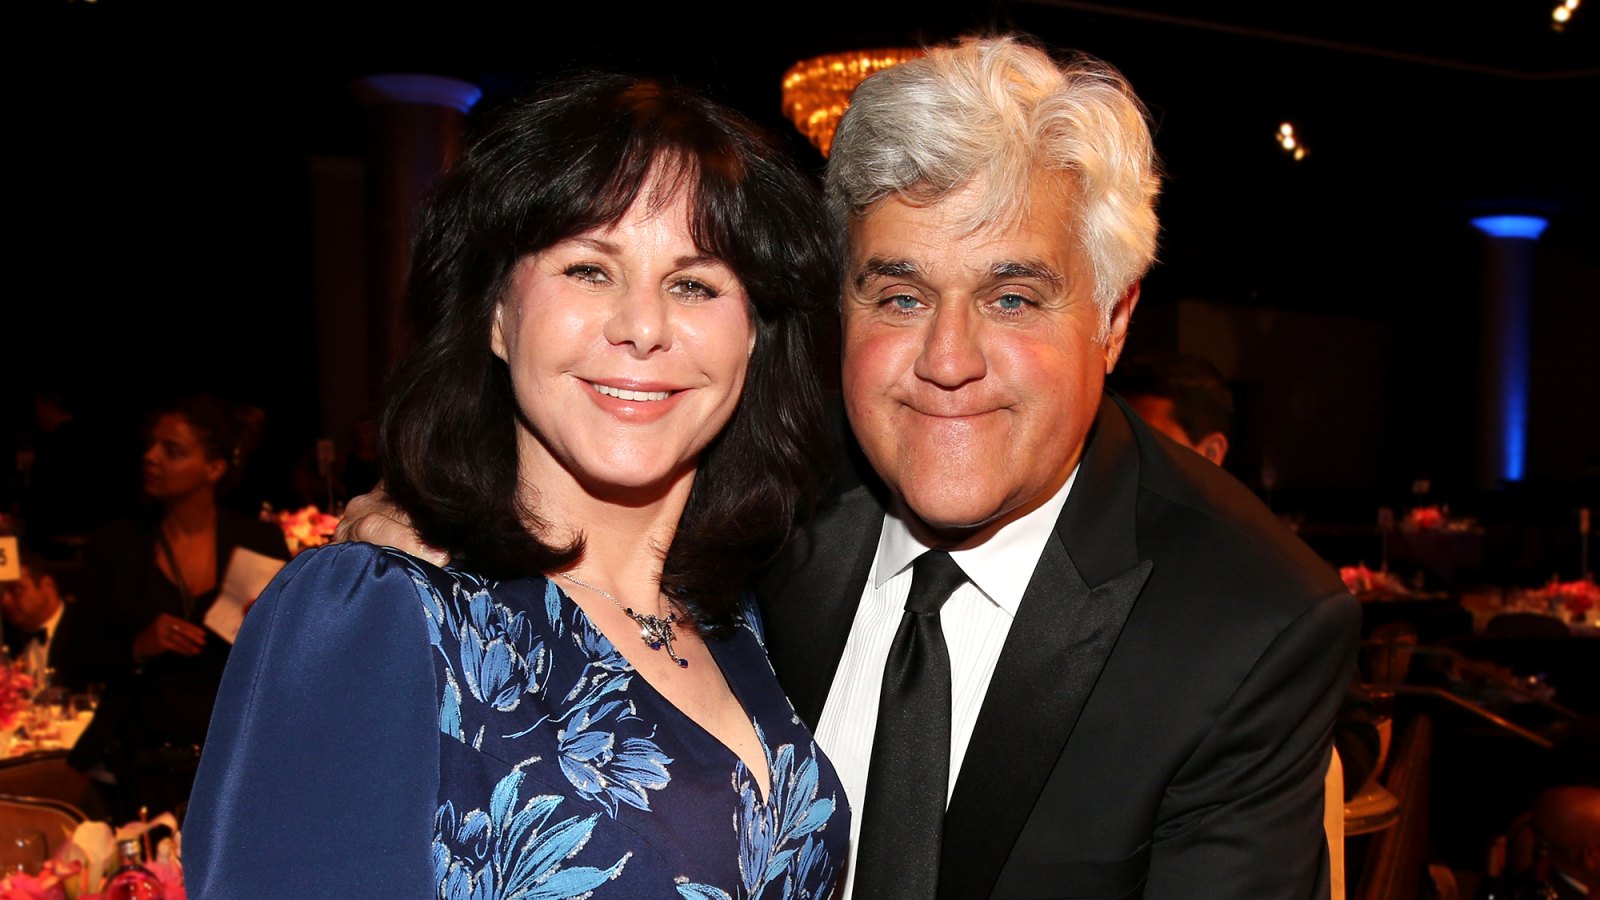 Jay Leno and Wife Mavis Leno: A Complete Timeline of Their Relationship